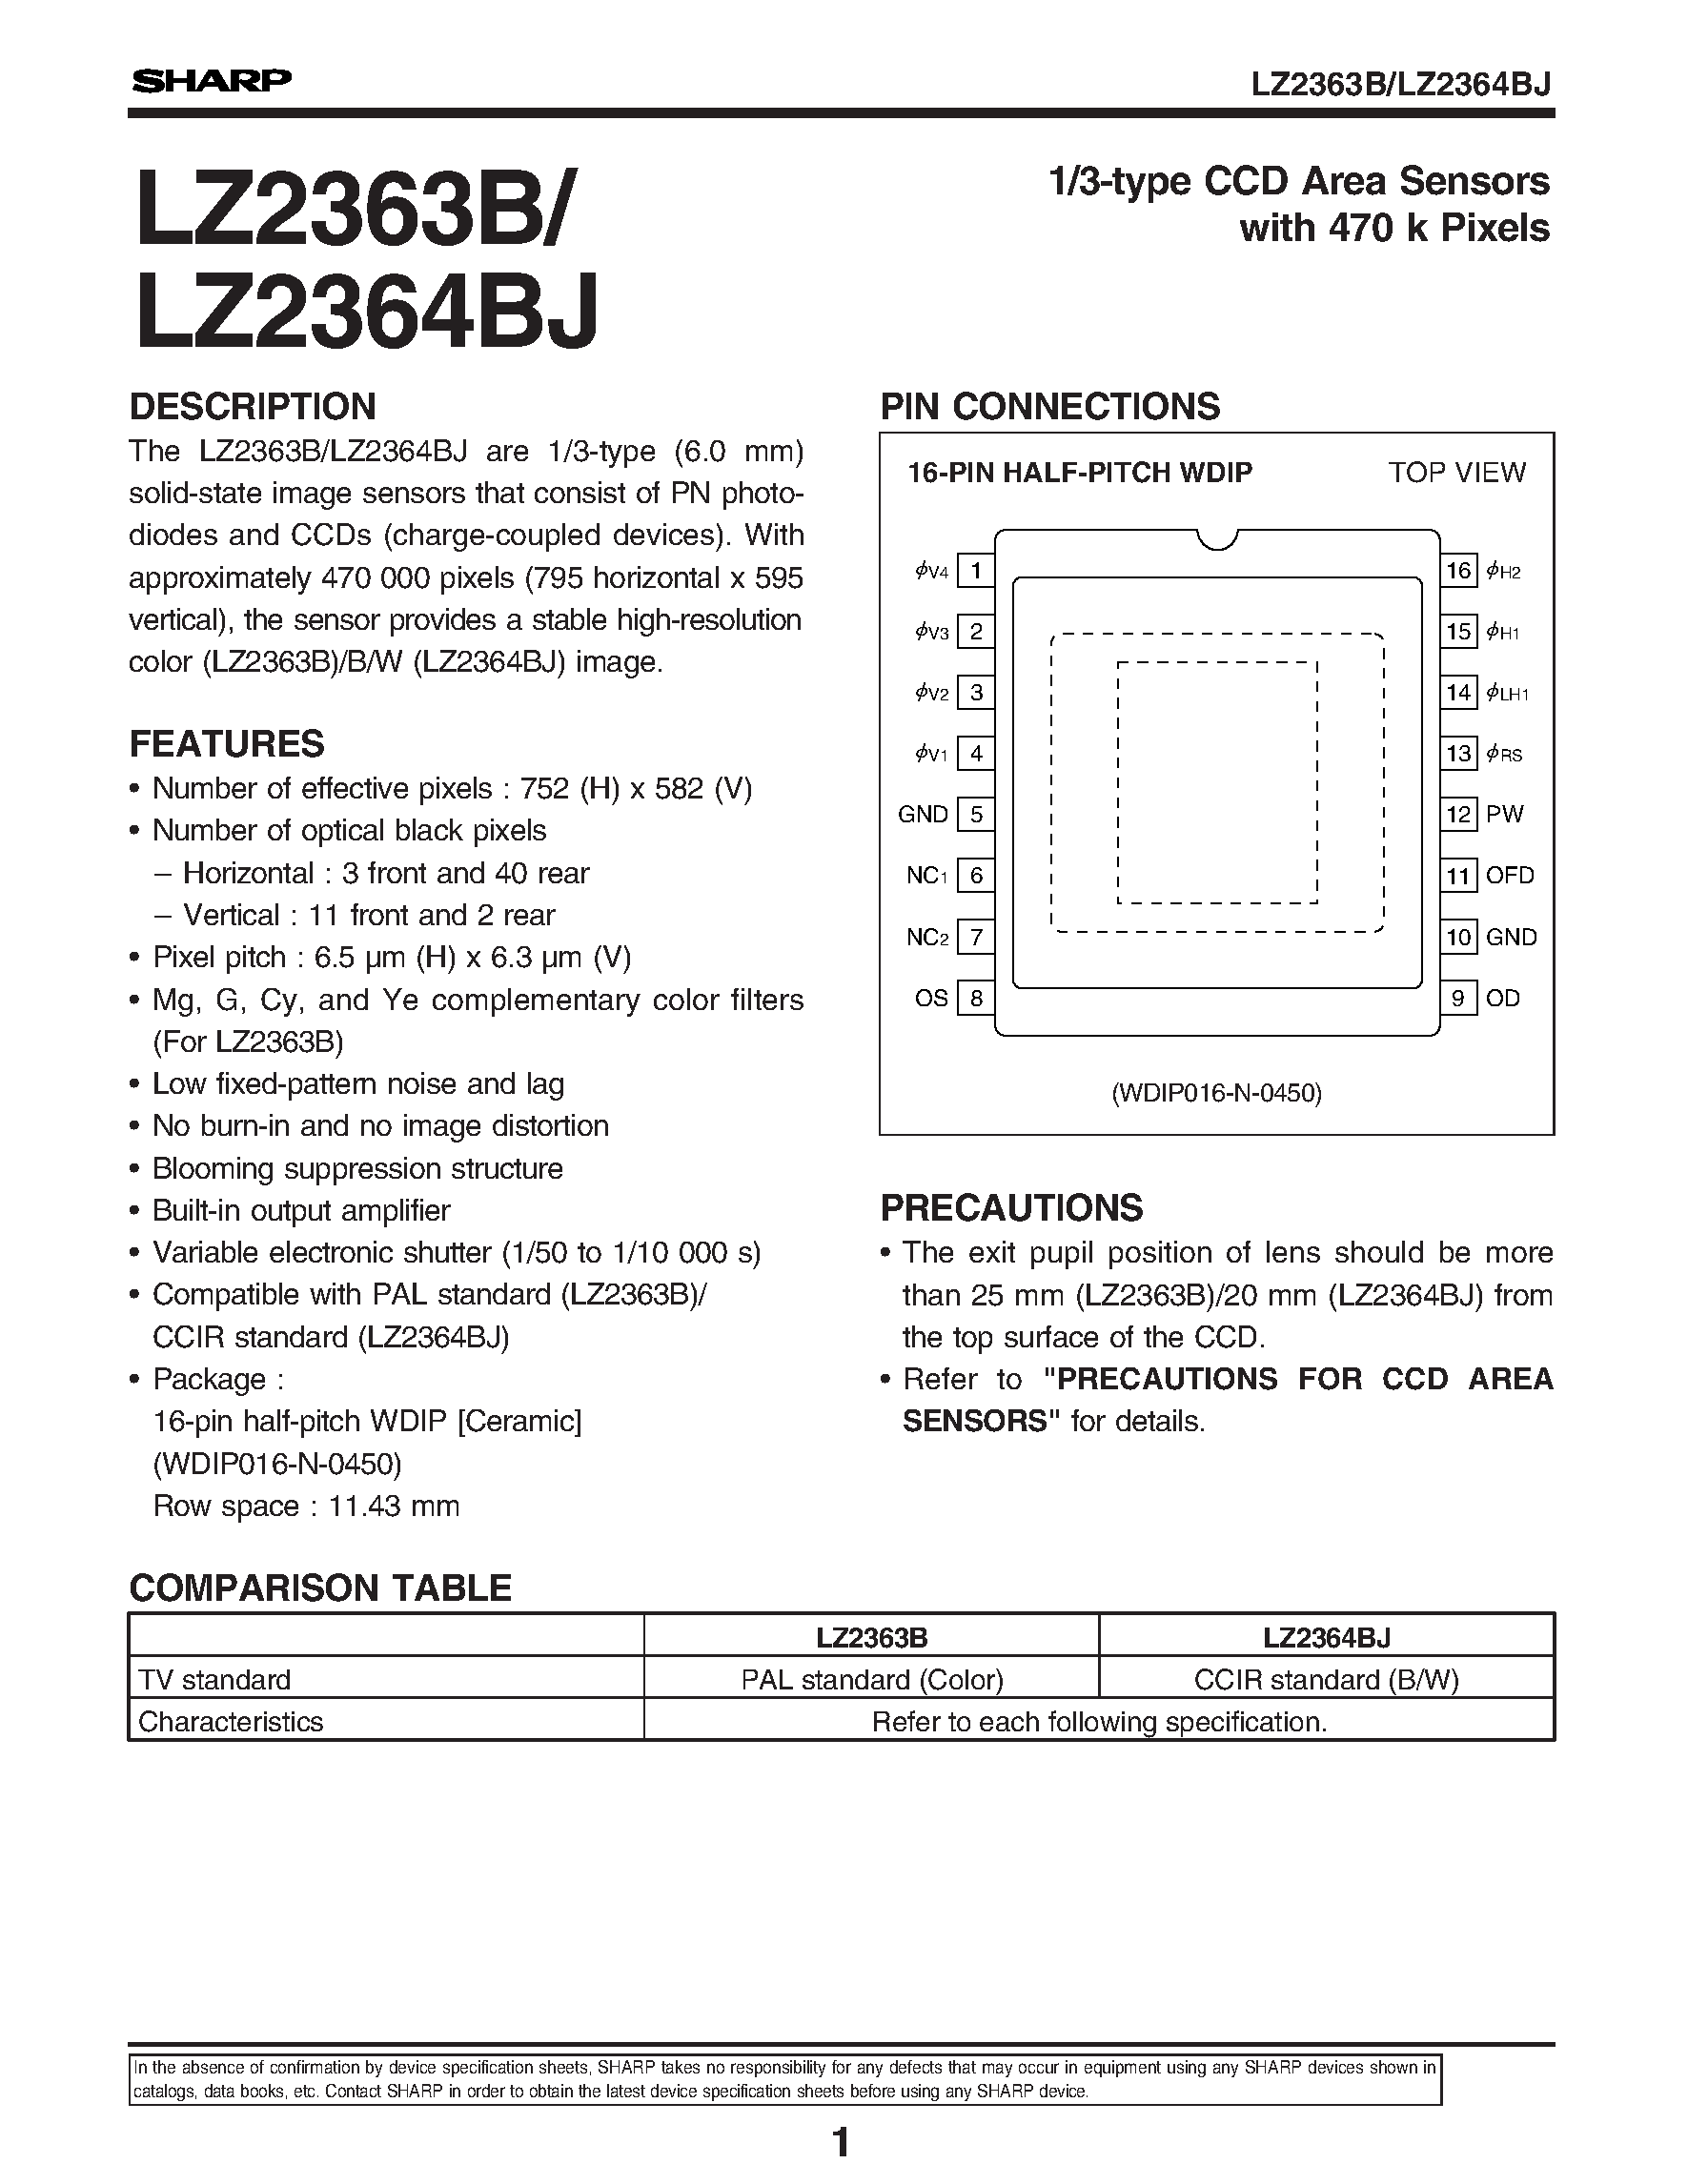 Datasheet LZ2364BJ - 1/3-type CCD Area Sensors with 470 k Pixels page 1